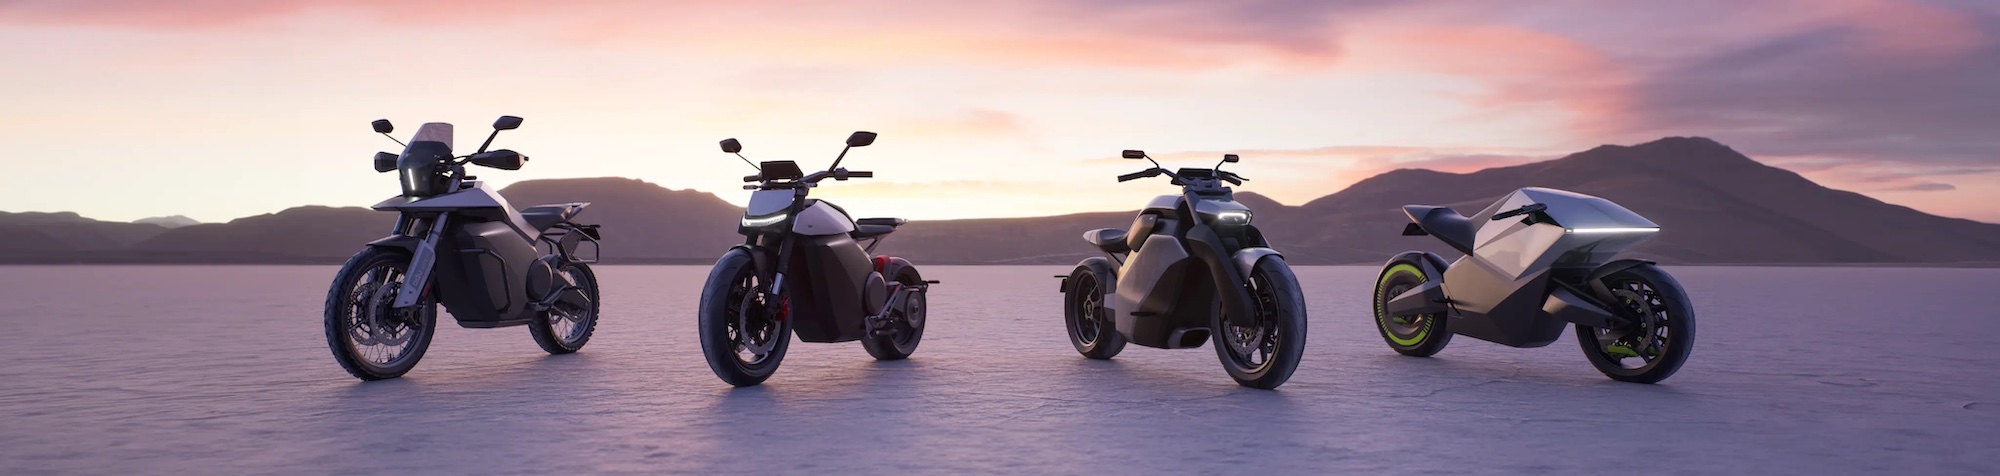 A view of Ola Electric's zero-emission motorcycles, debuted at MotoGP Bharat. From left to right: Adventure, roadster, Cruiser, and Diamondhead. Media sourced from Ola Electric.